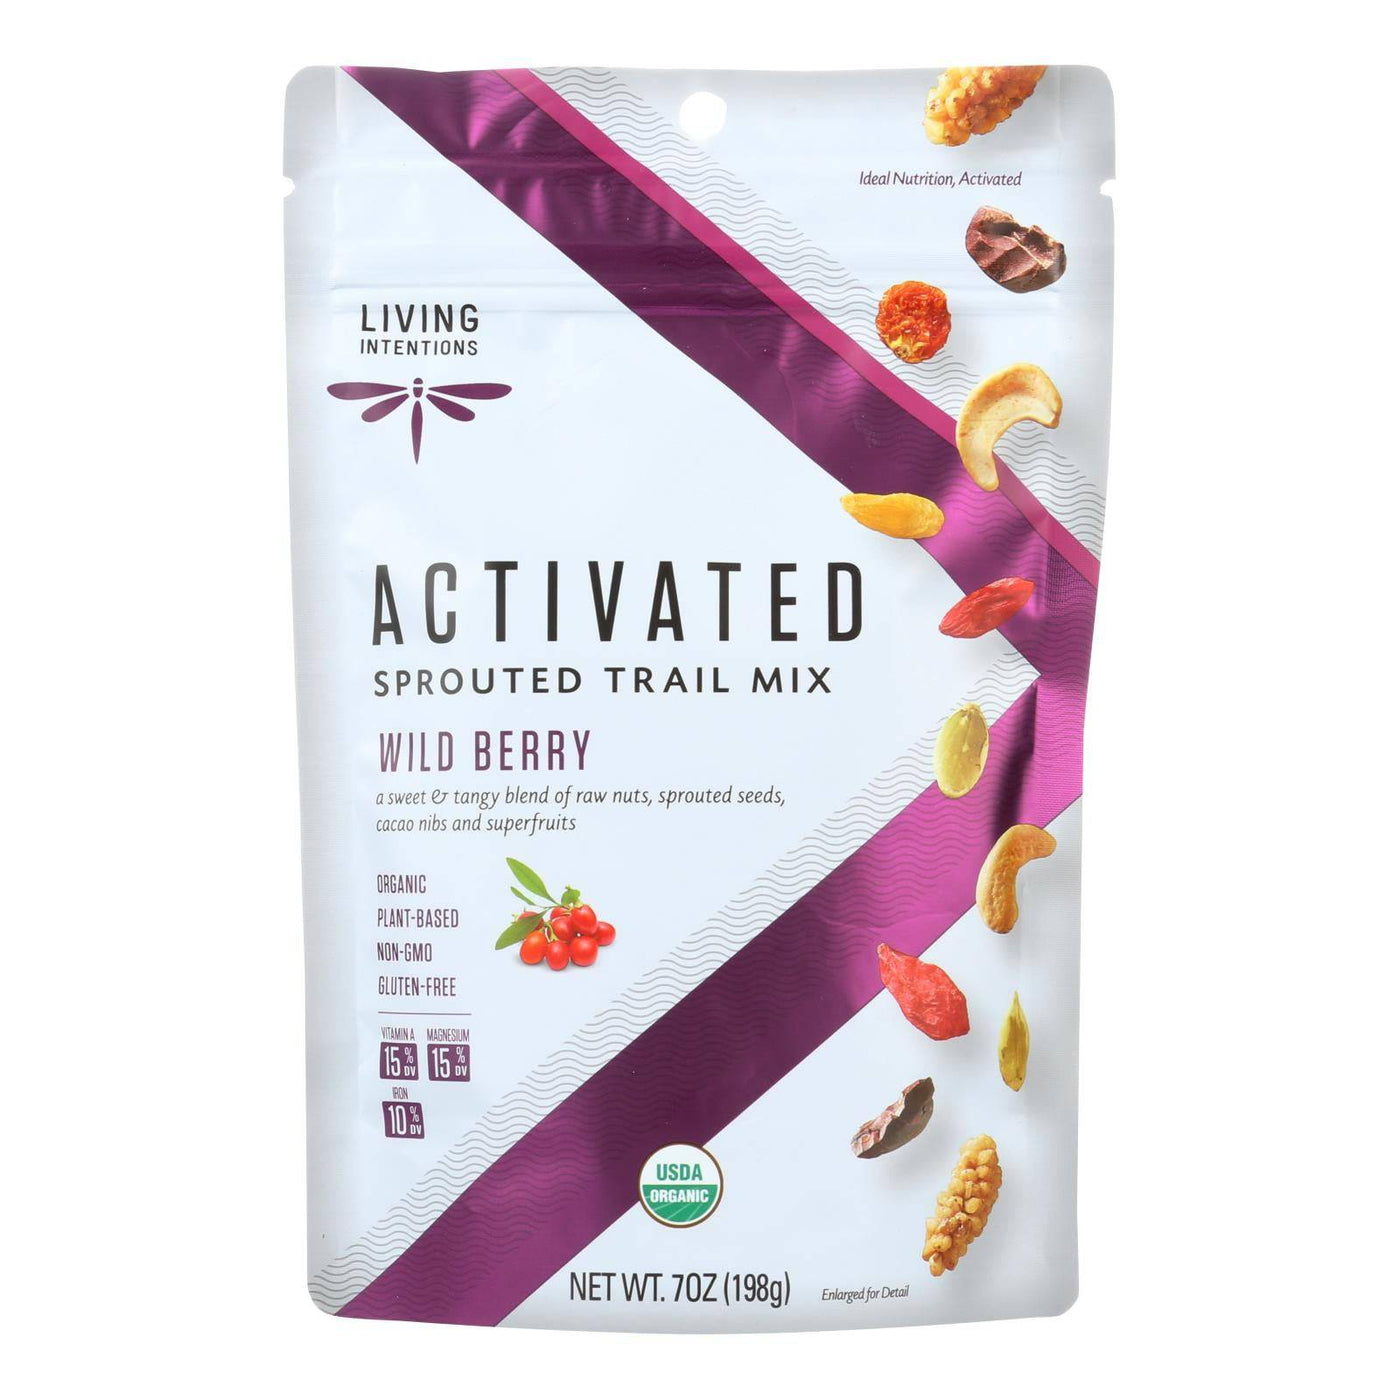 Buy Living Intentions Organic Sprouted Trail Mix - Wild Berry - Case Of 6 - 7 Oz.  at OnlyNaturals.us